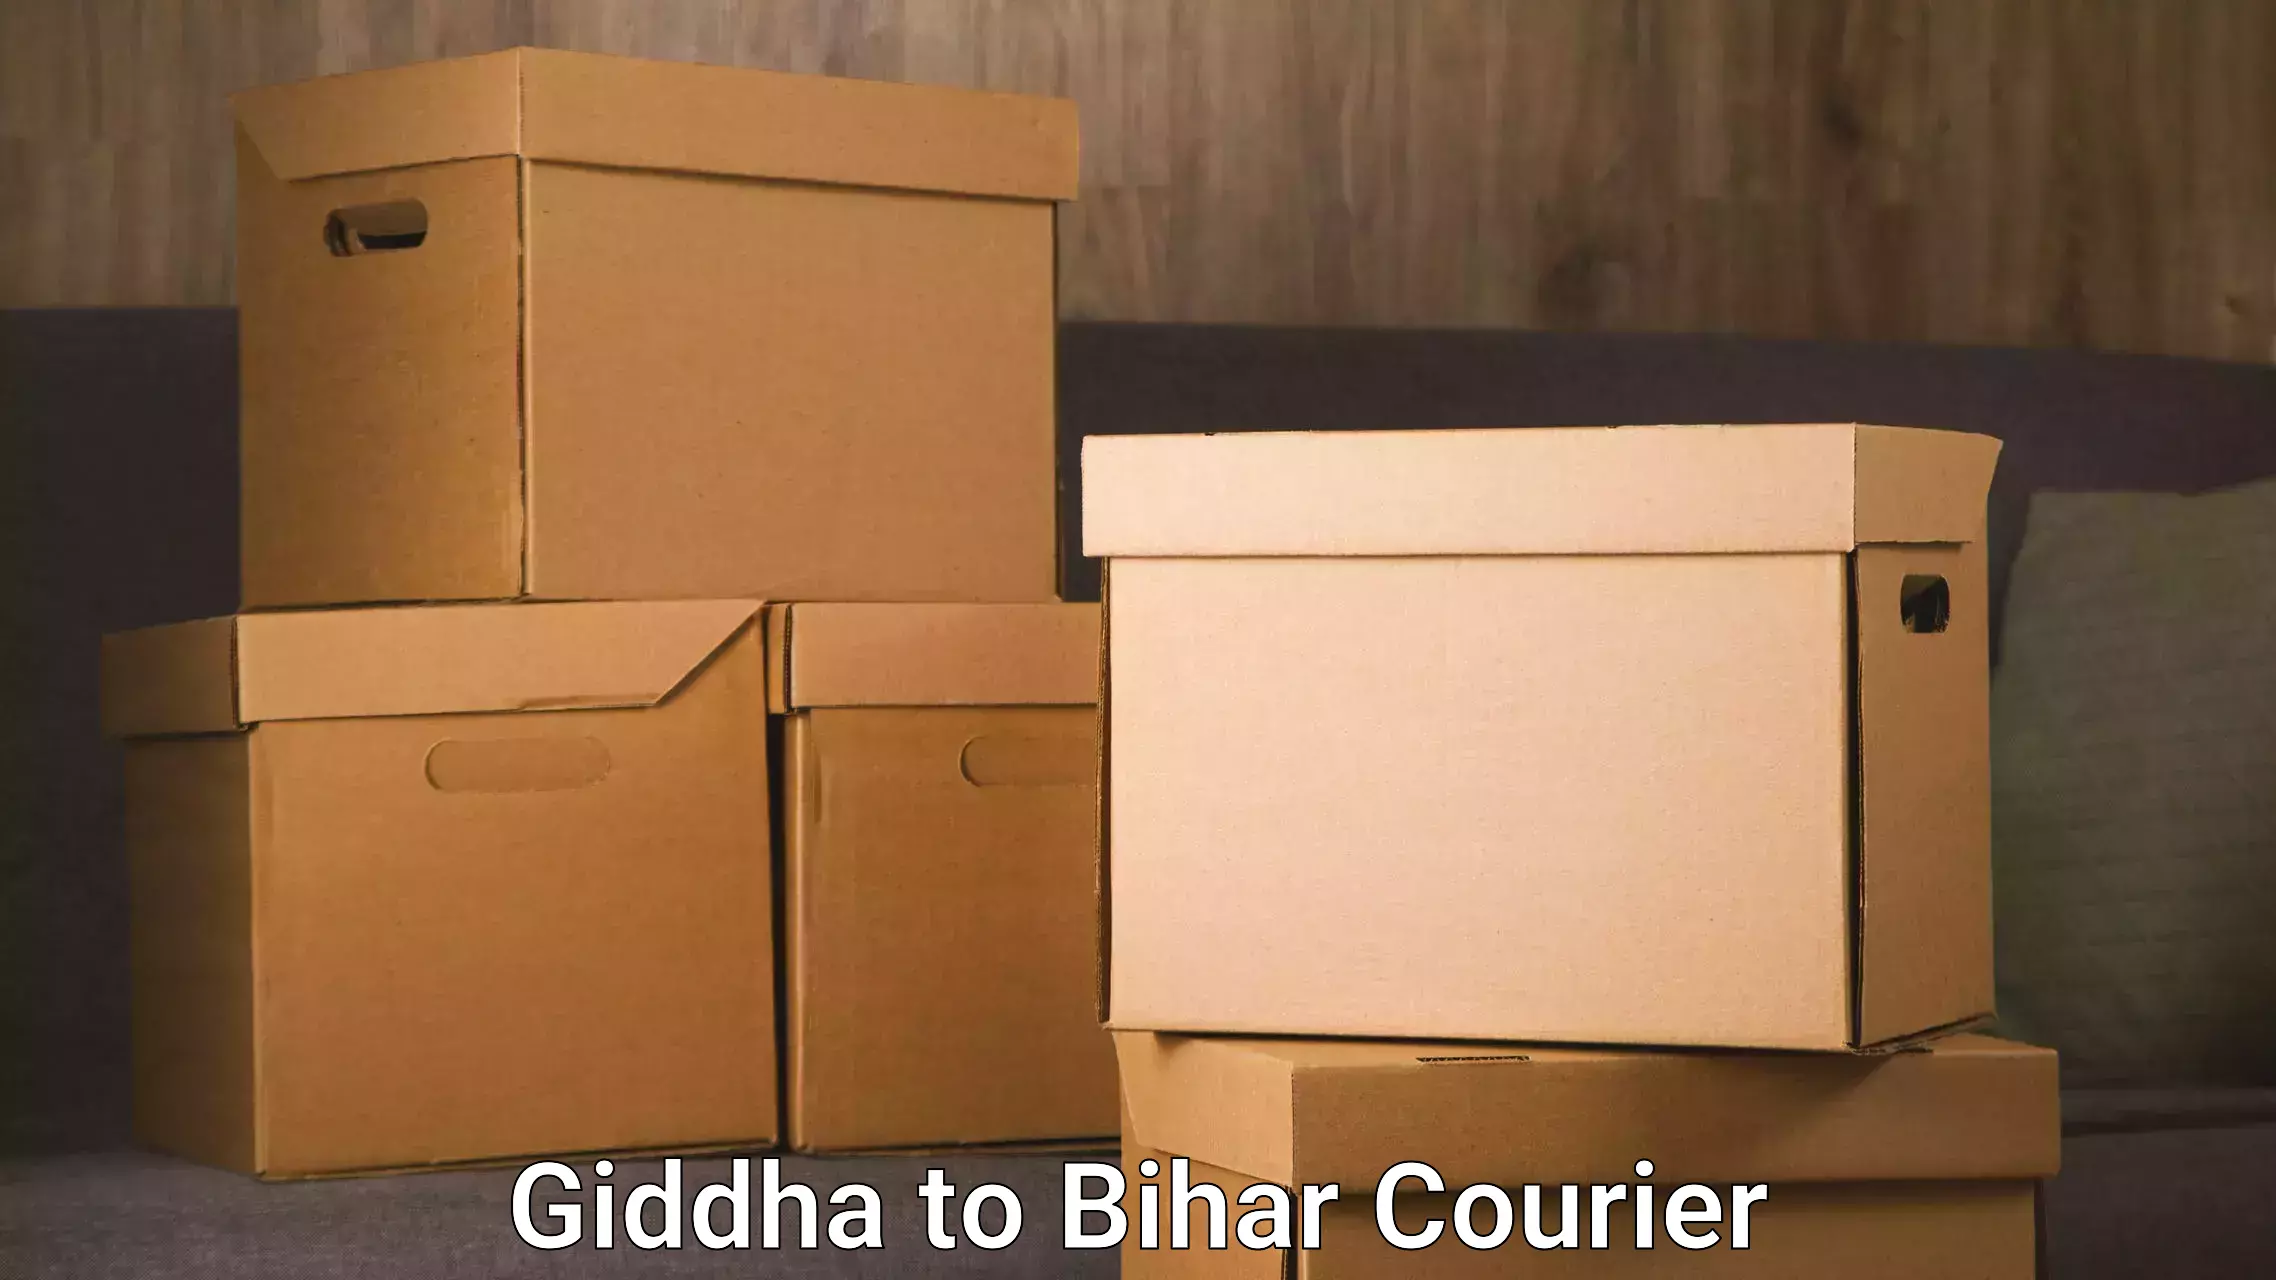 Trusted relocation experts Giddha to Singhia